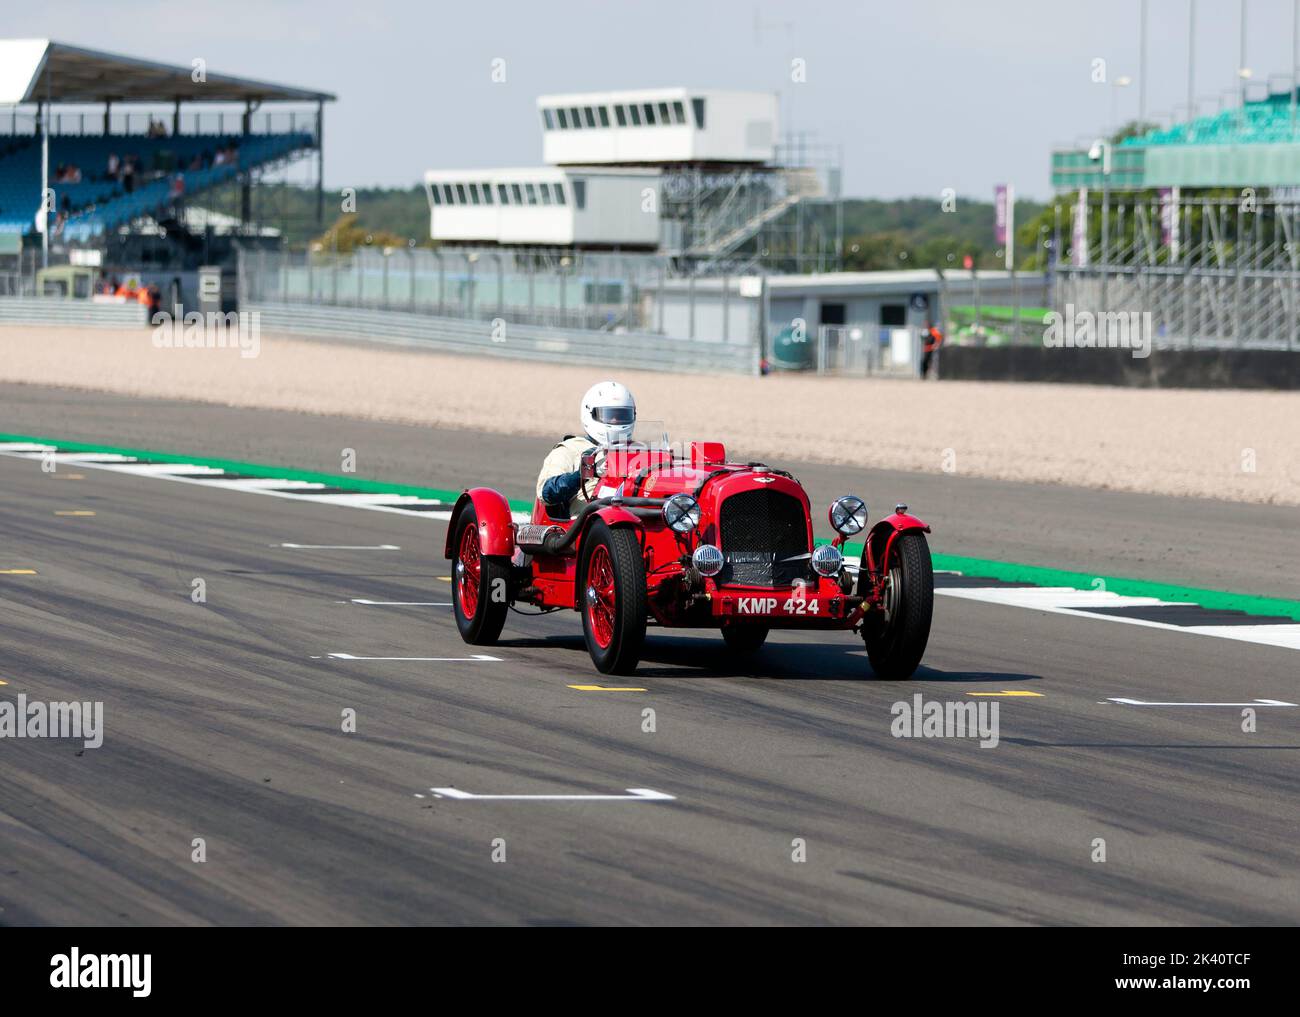 Richard Lake's, Red, 1938, Aston Martin Speed Model during the MRL Pre-War Sports Cars 'BRDC 500' Race at the 2022 Silverstone Classic Stock Photo